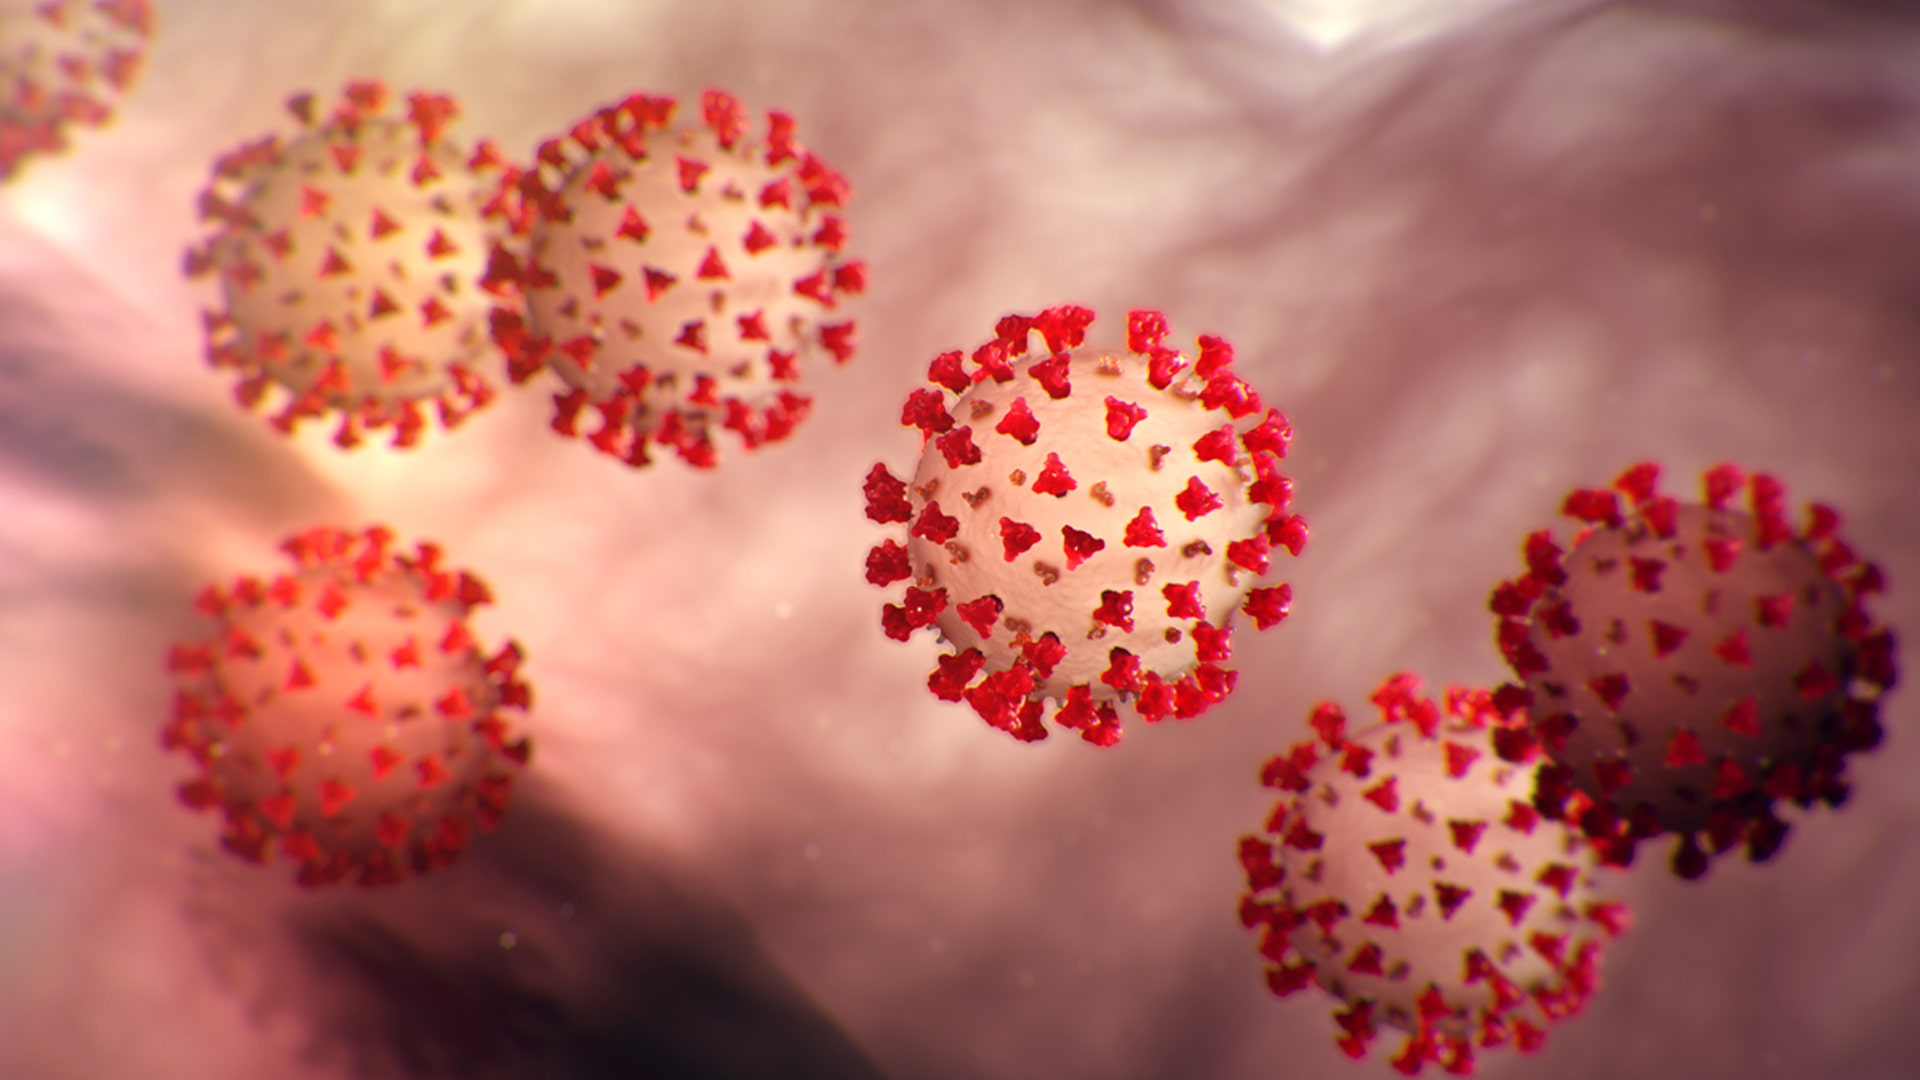 Images of the COVID-19 coronavirus shared by the CDC.